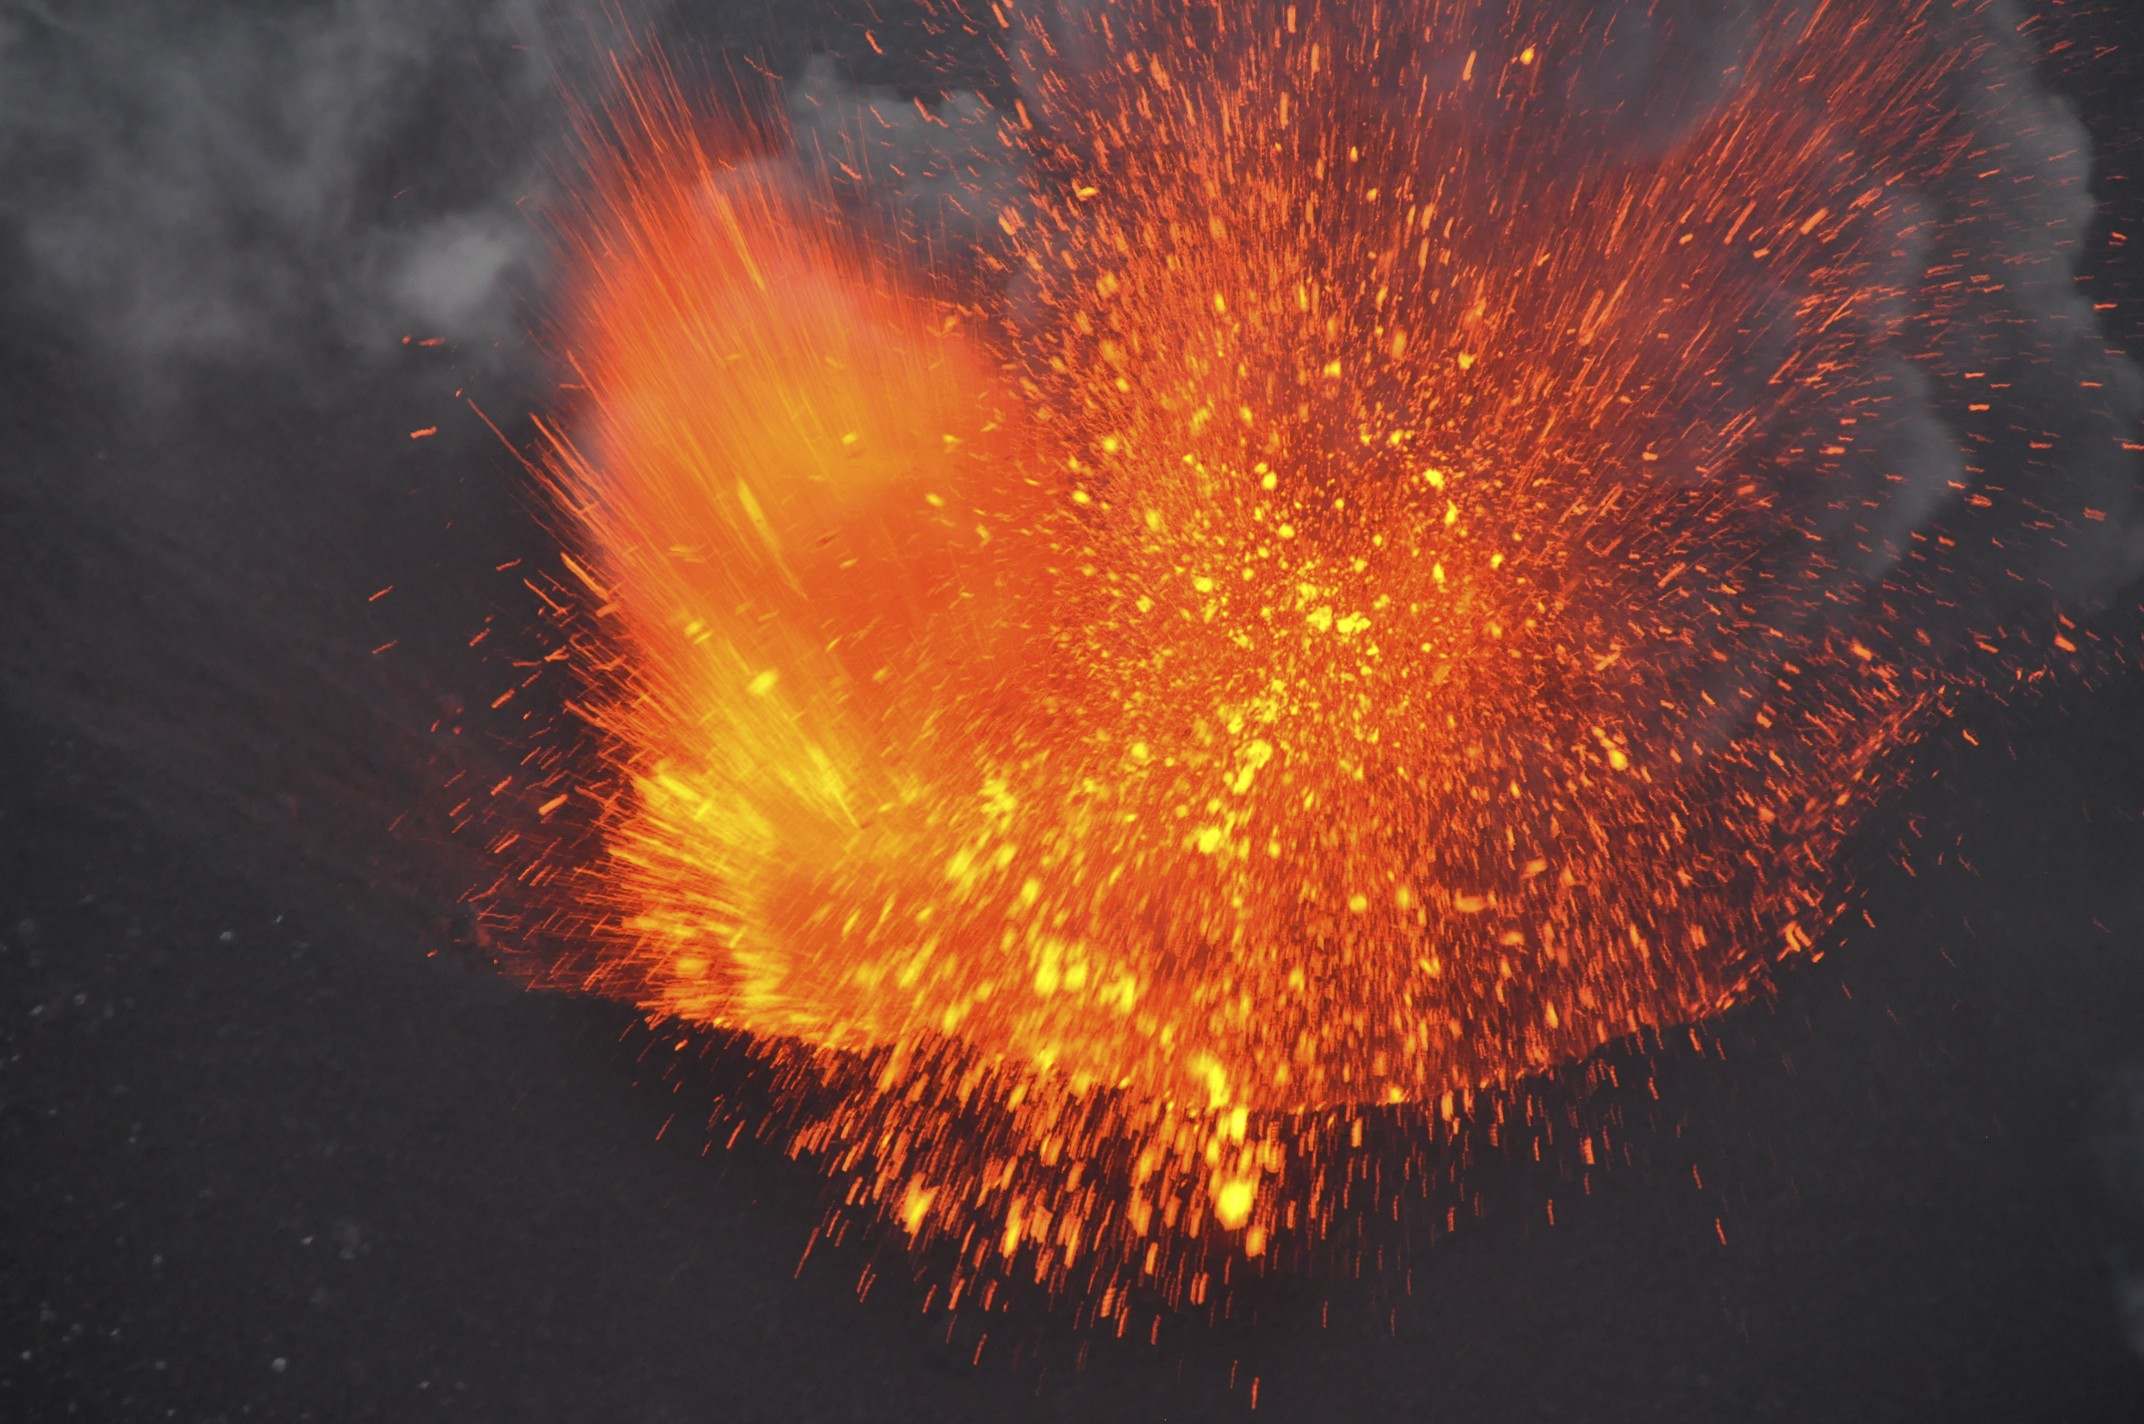 An eruption on Stromboli with a telephoto lens